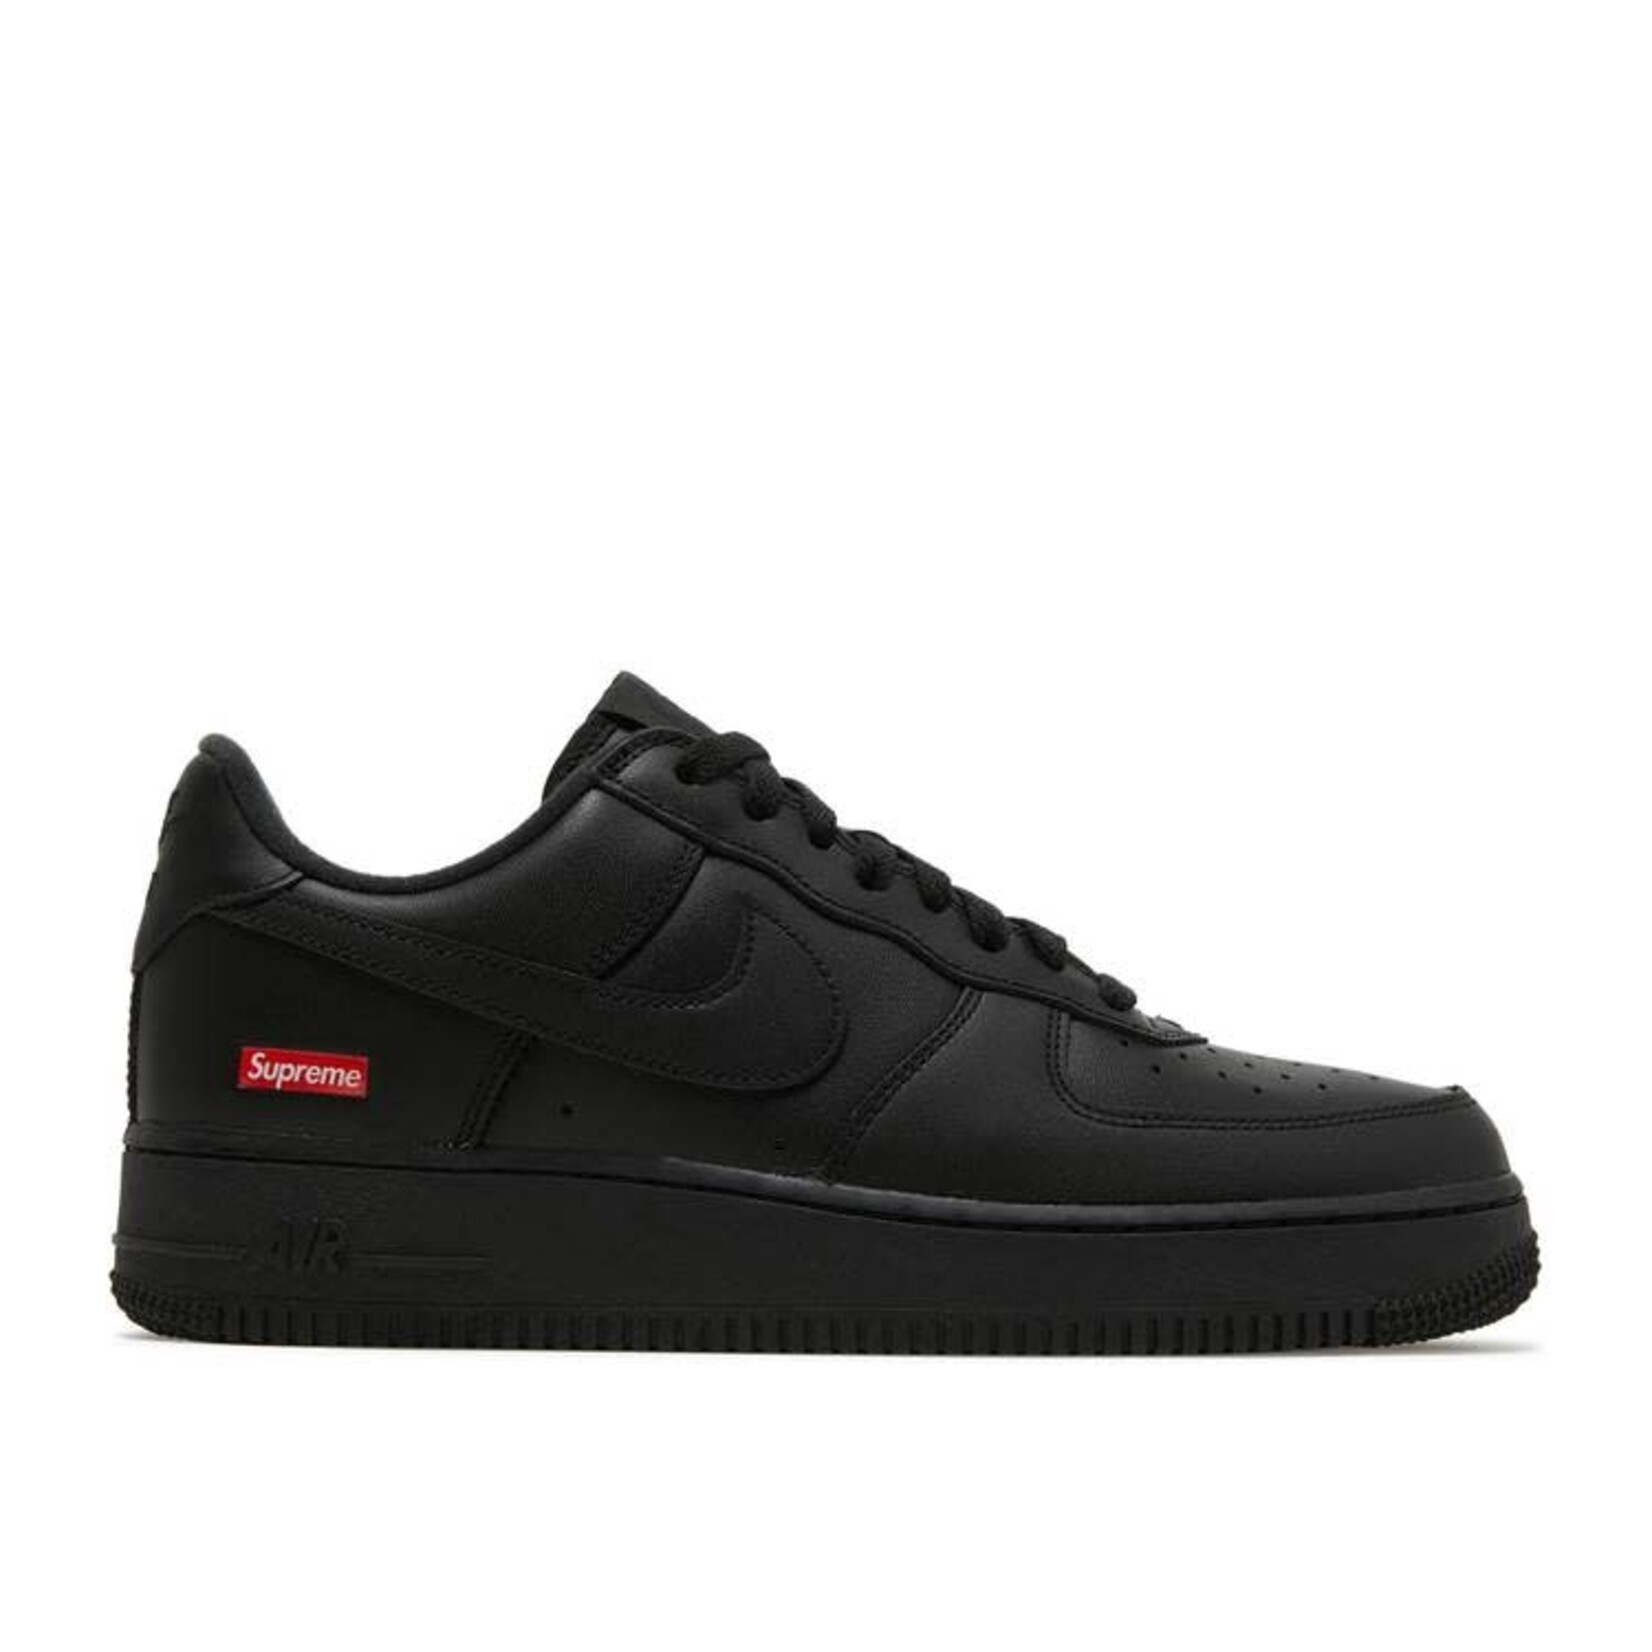 Nike Nike Air Force 1 Low Supreme Black Size 11, DS BRAND NEW